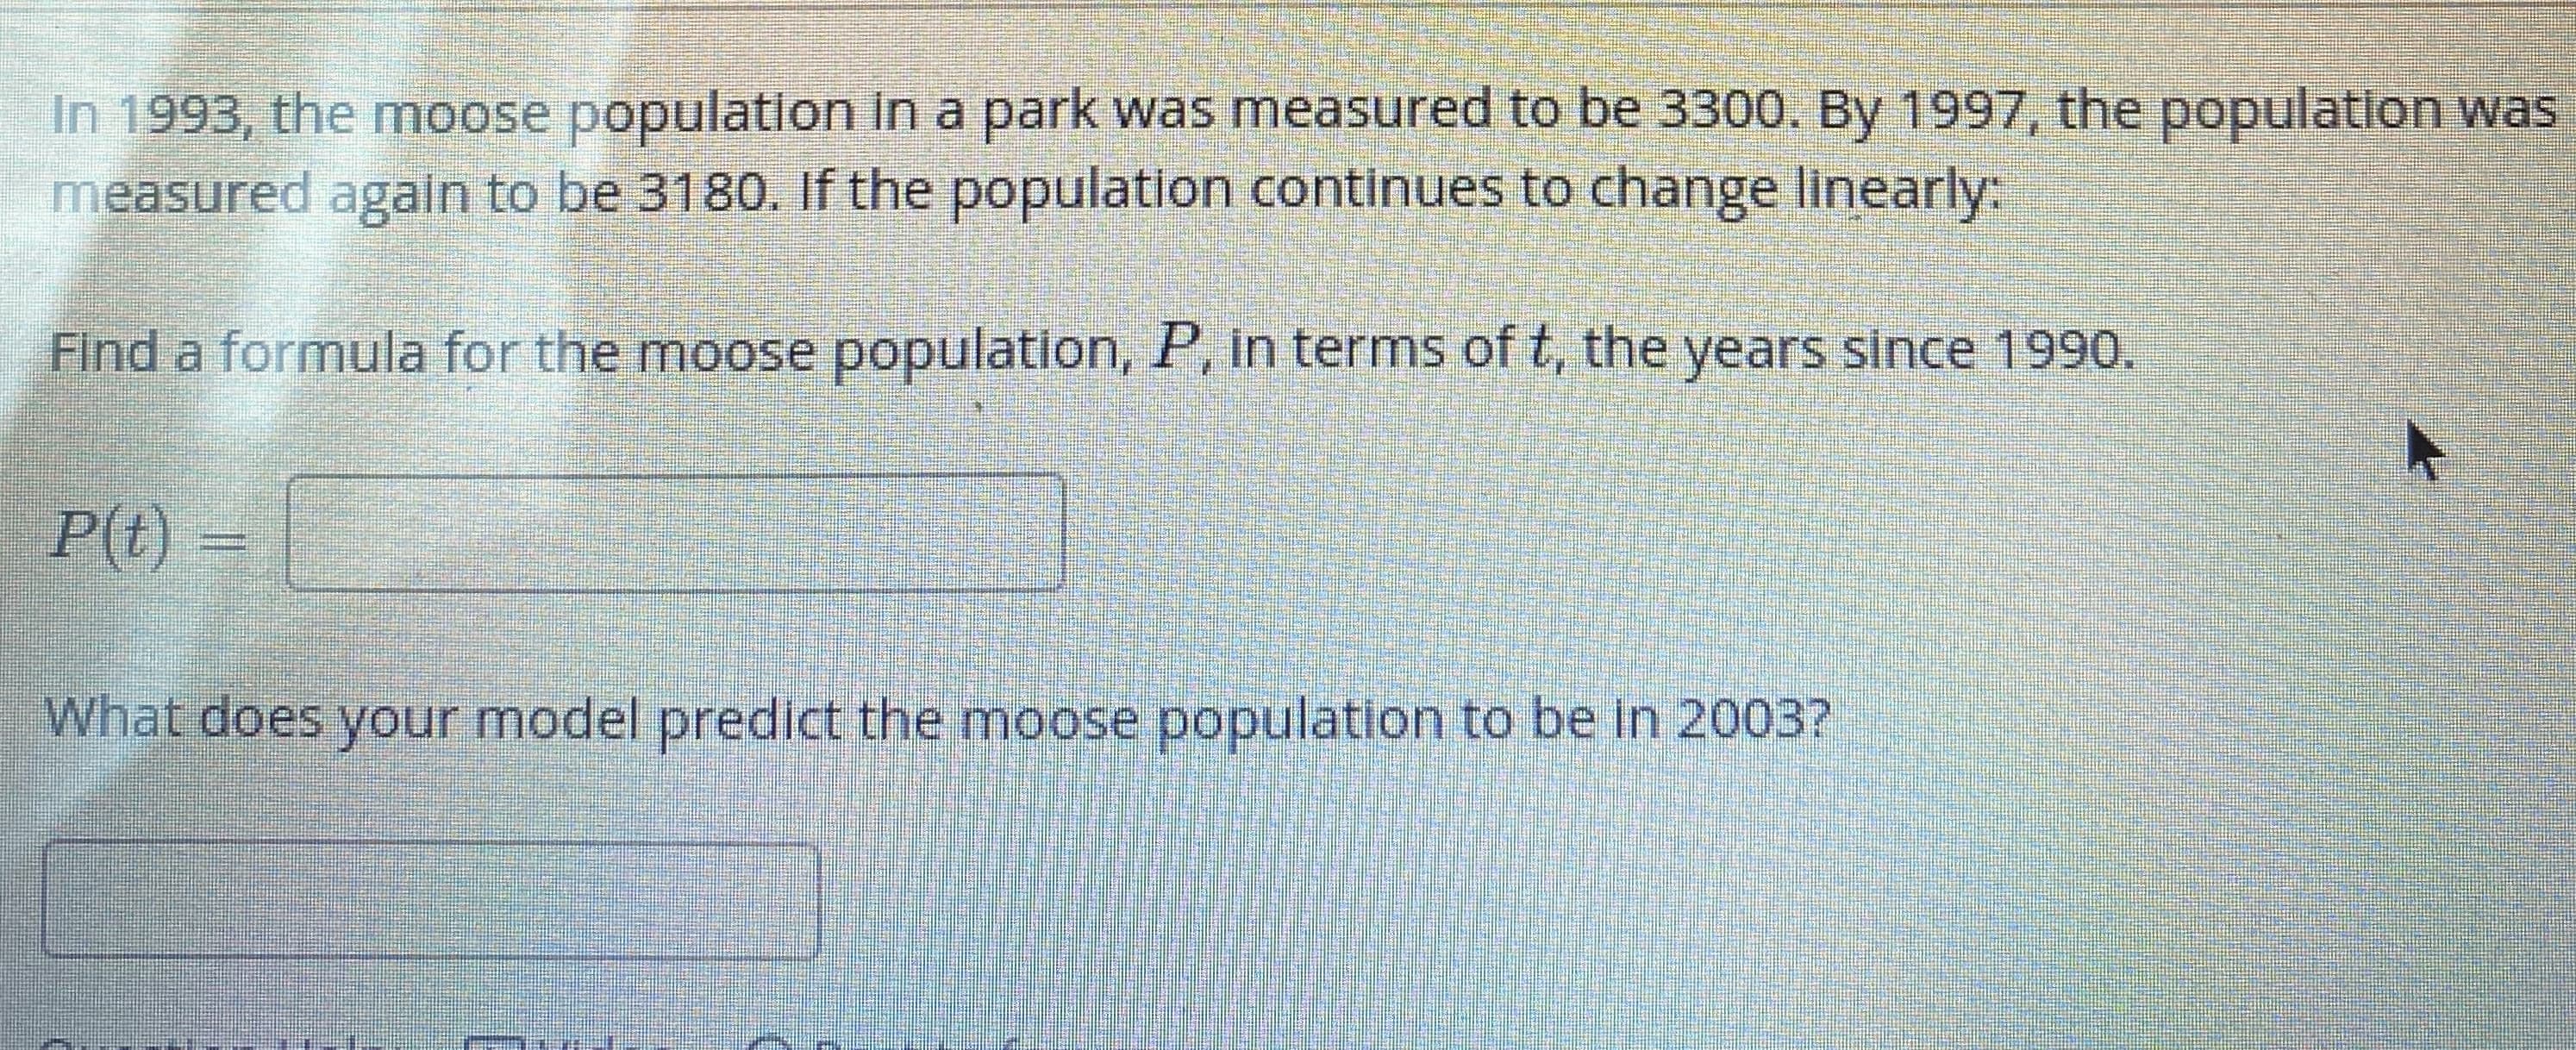 In 1993, the moose population in a park was measured to be 3300. By 1997, the population was
measured again to be 3180. If the population continues to change linearly:
